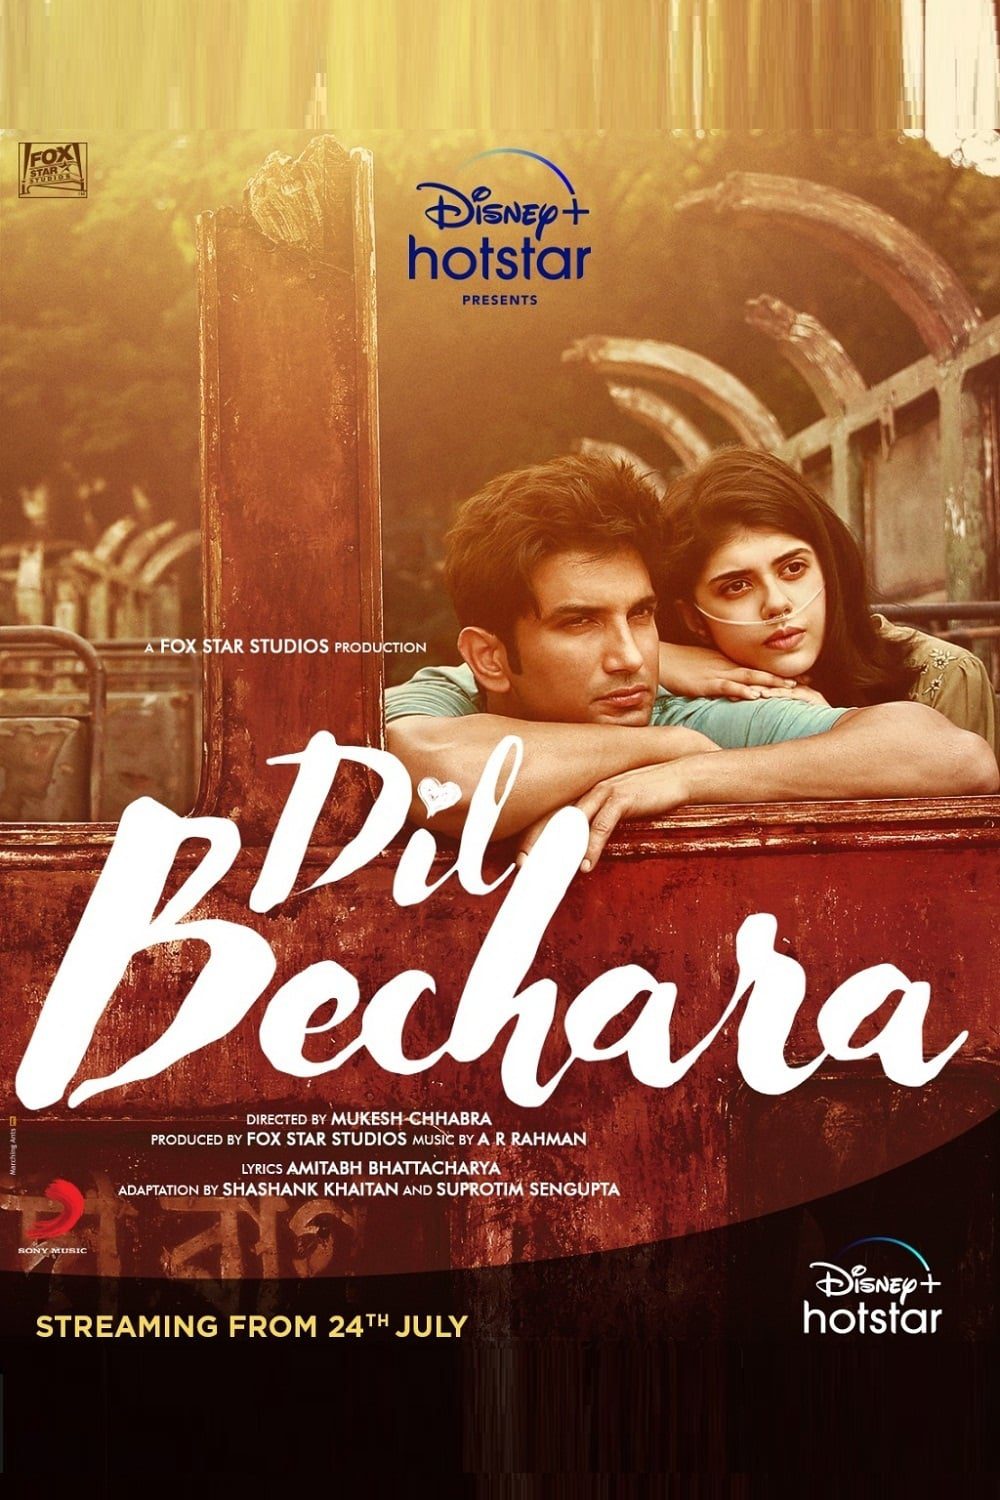 Poster for the movie "Dil Bechara"